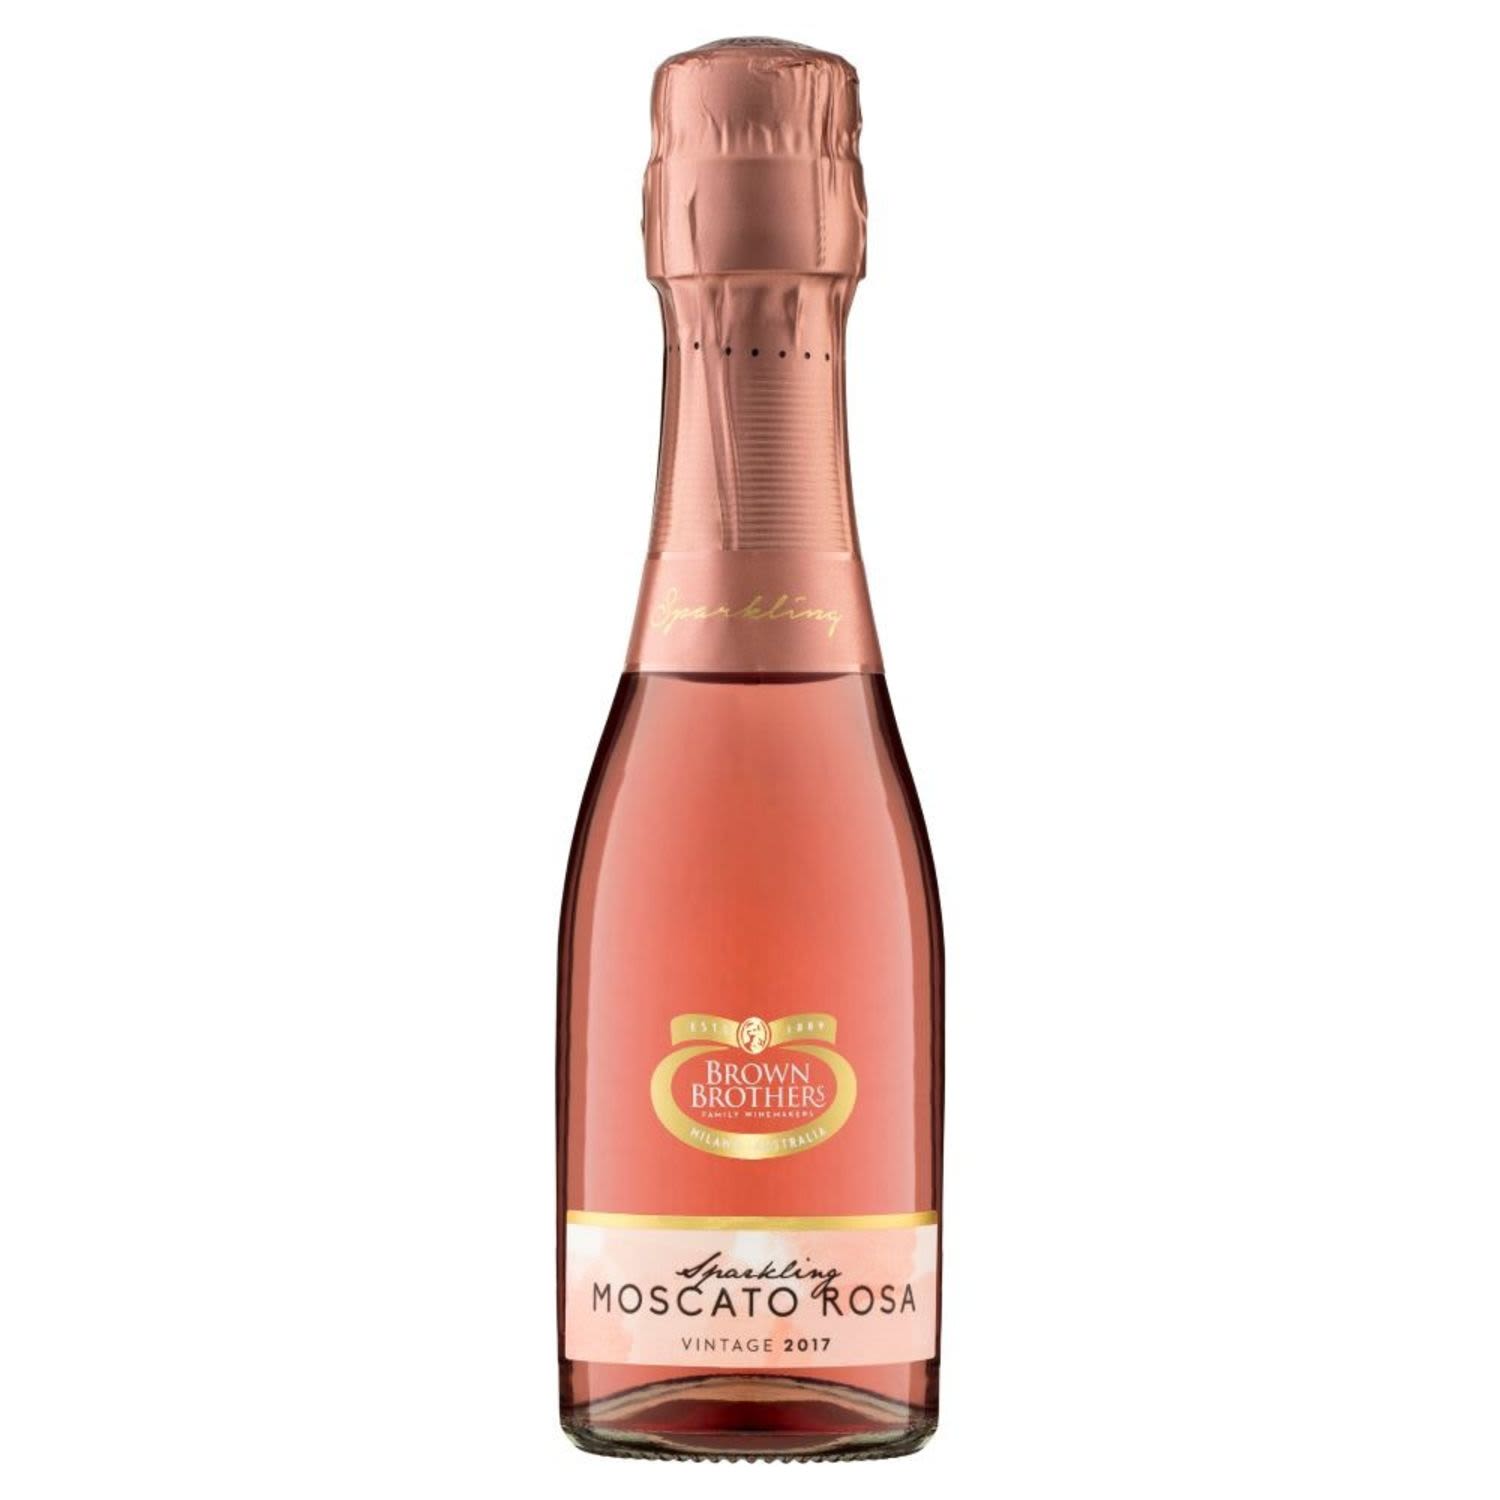 Brown Brothers Sparkling Moscato Rosa 200mL Bottle